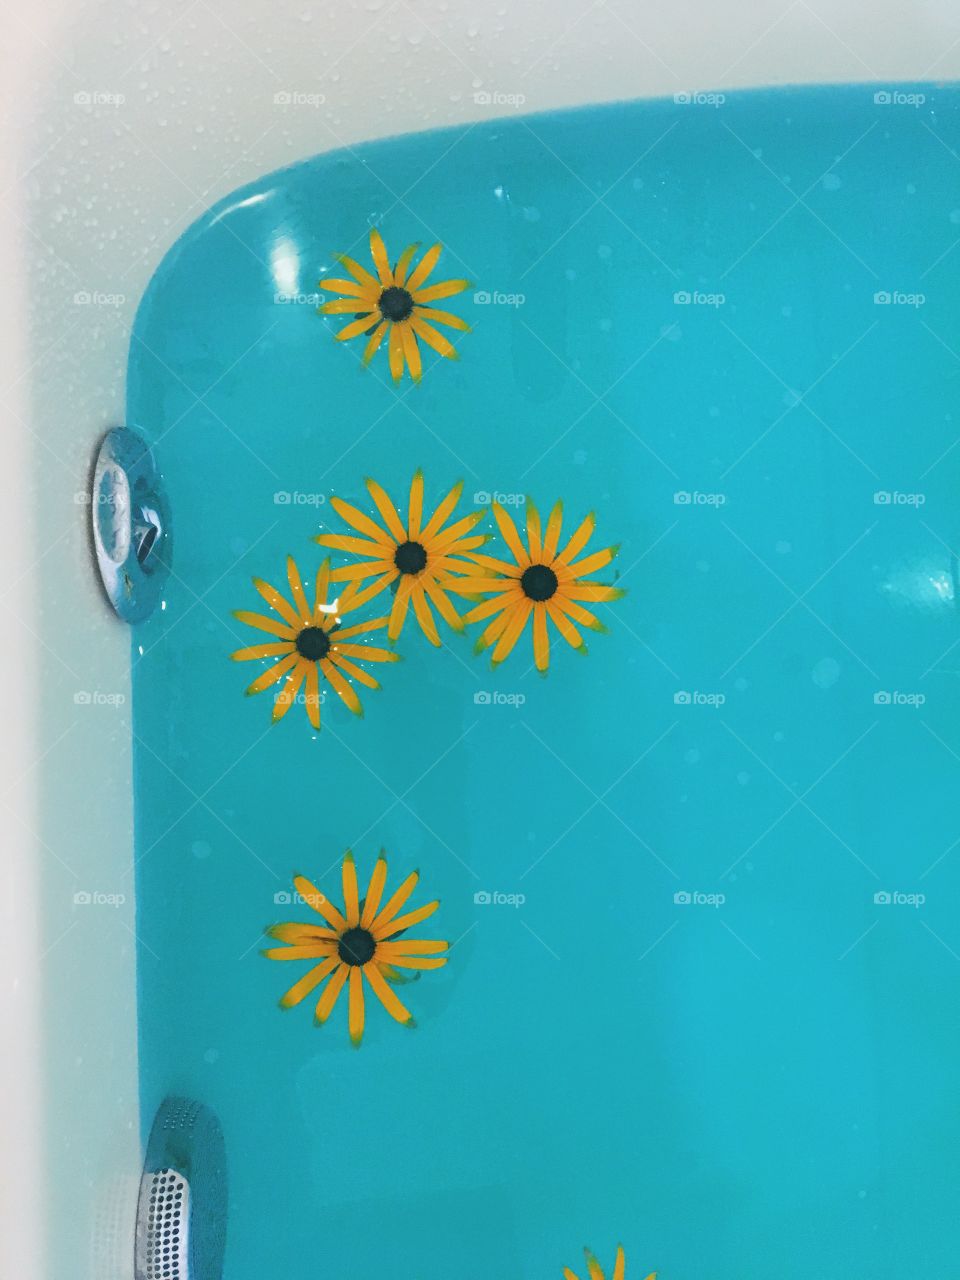 Flowers in a tub :)